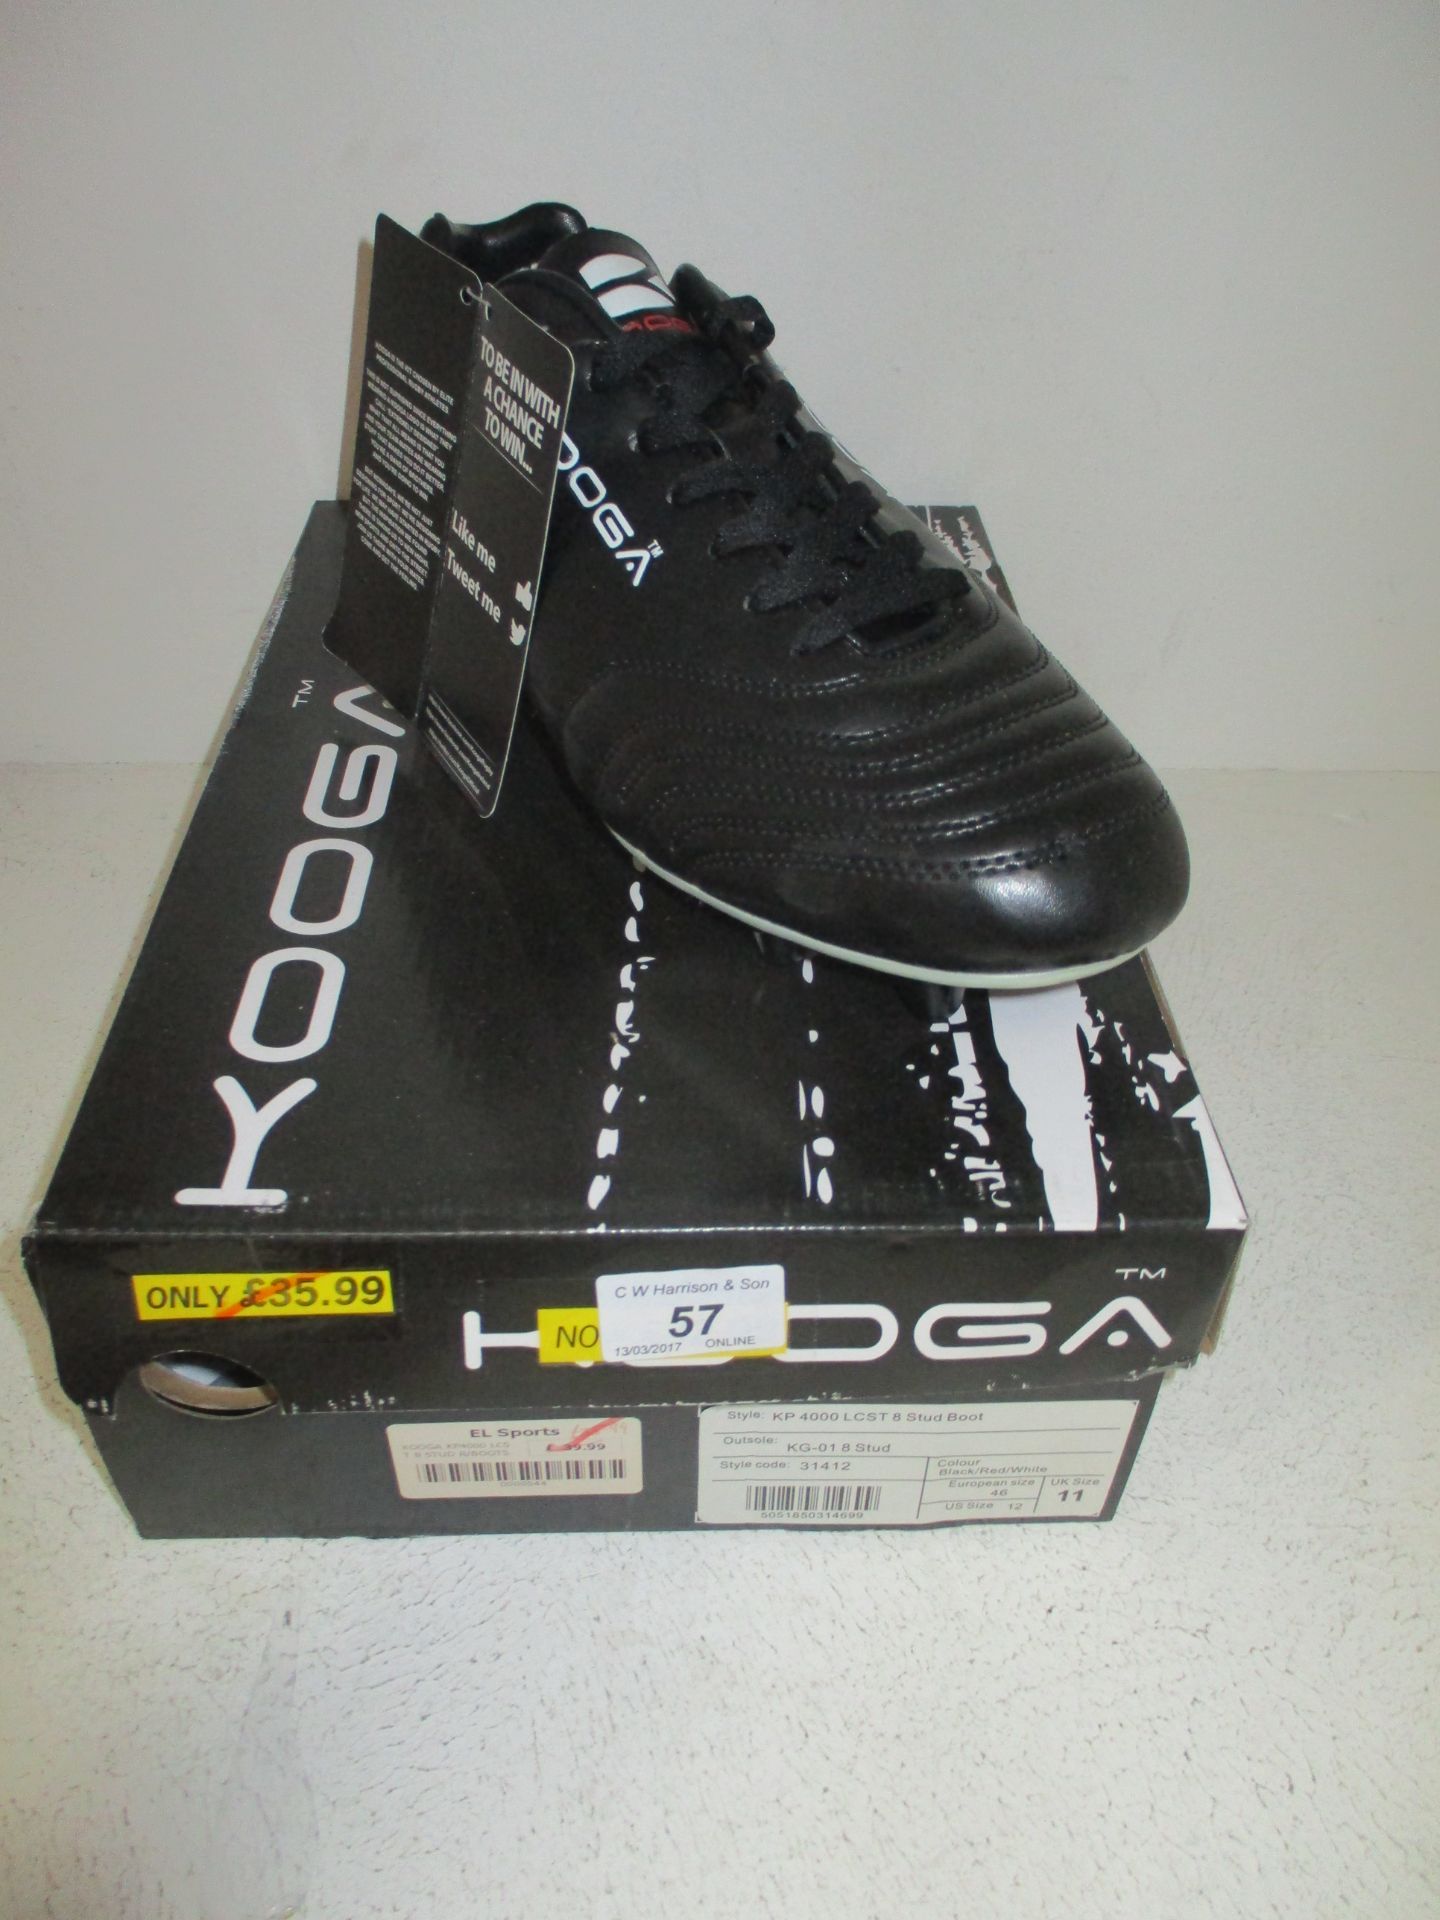 A pair of Kooga 4000 LCST 8 stud rugby boots size 11